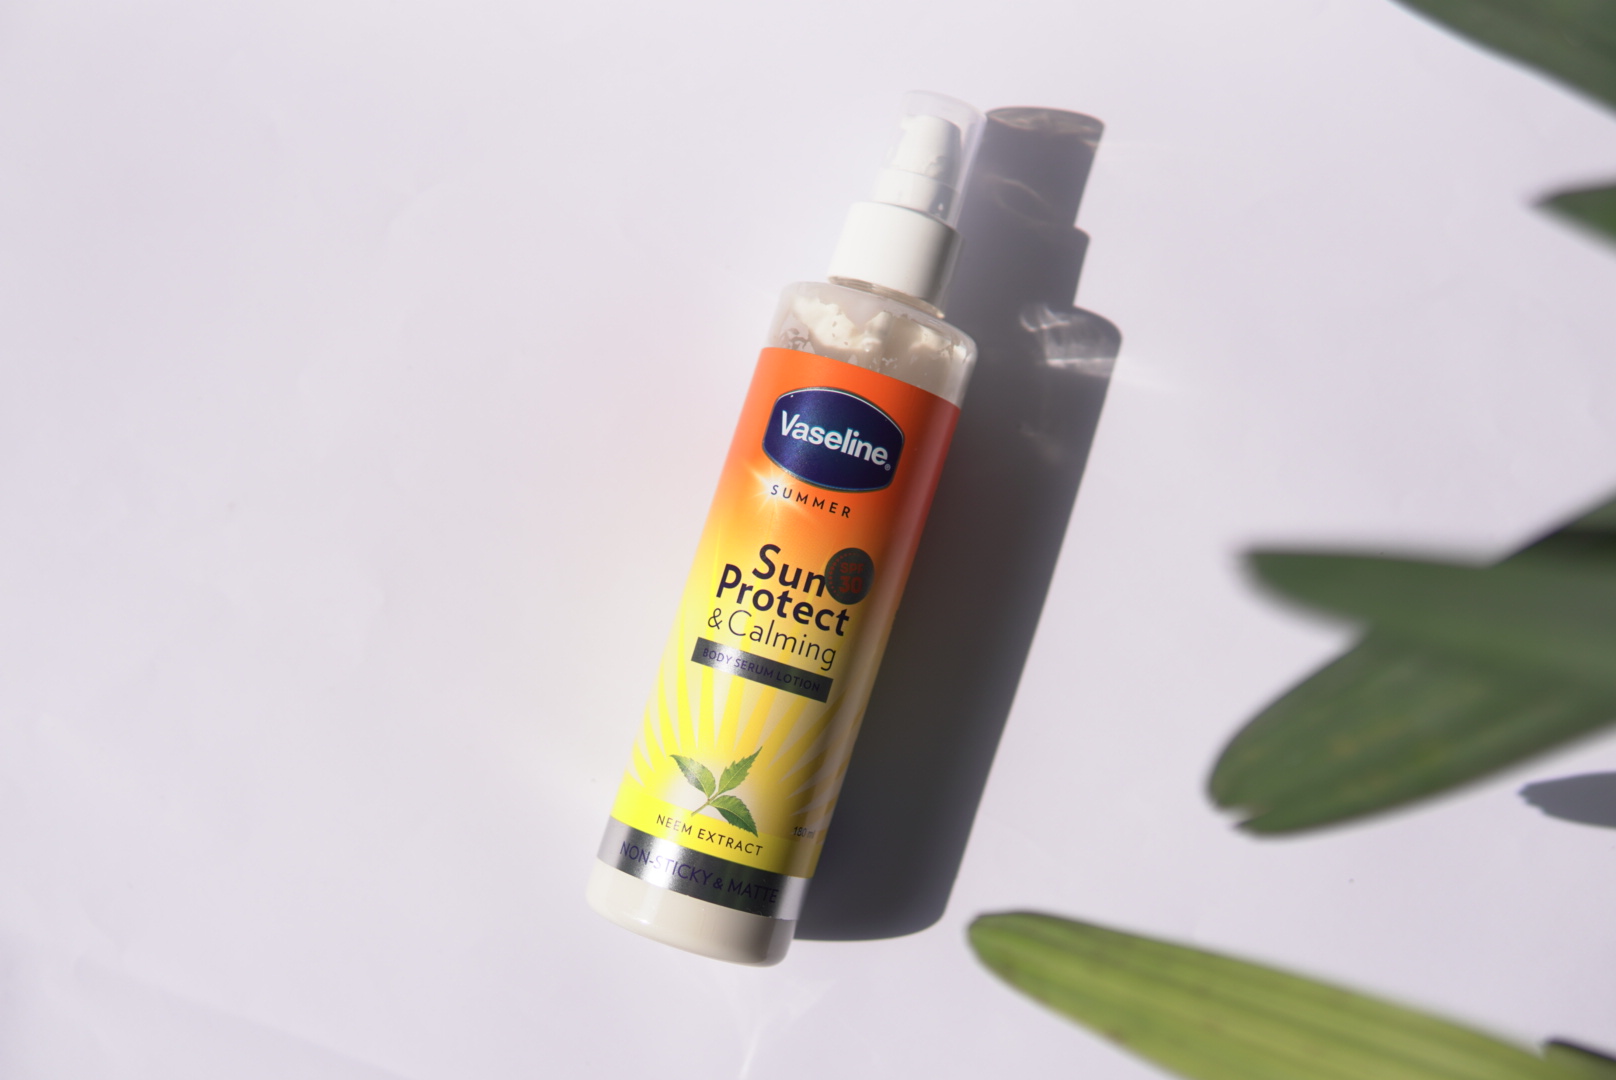 Vaseline Sun Protect & Calming SPF 30 PA   Body Serum Lotion Review